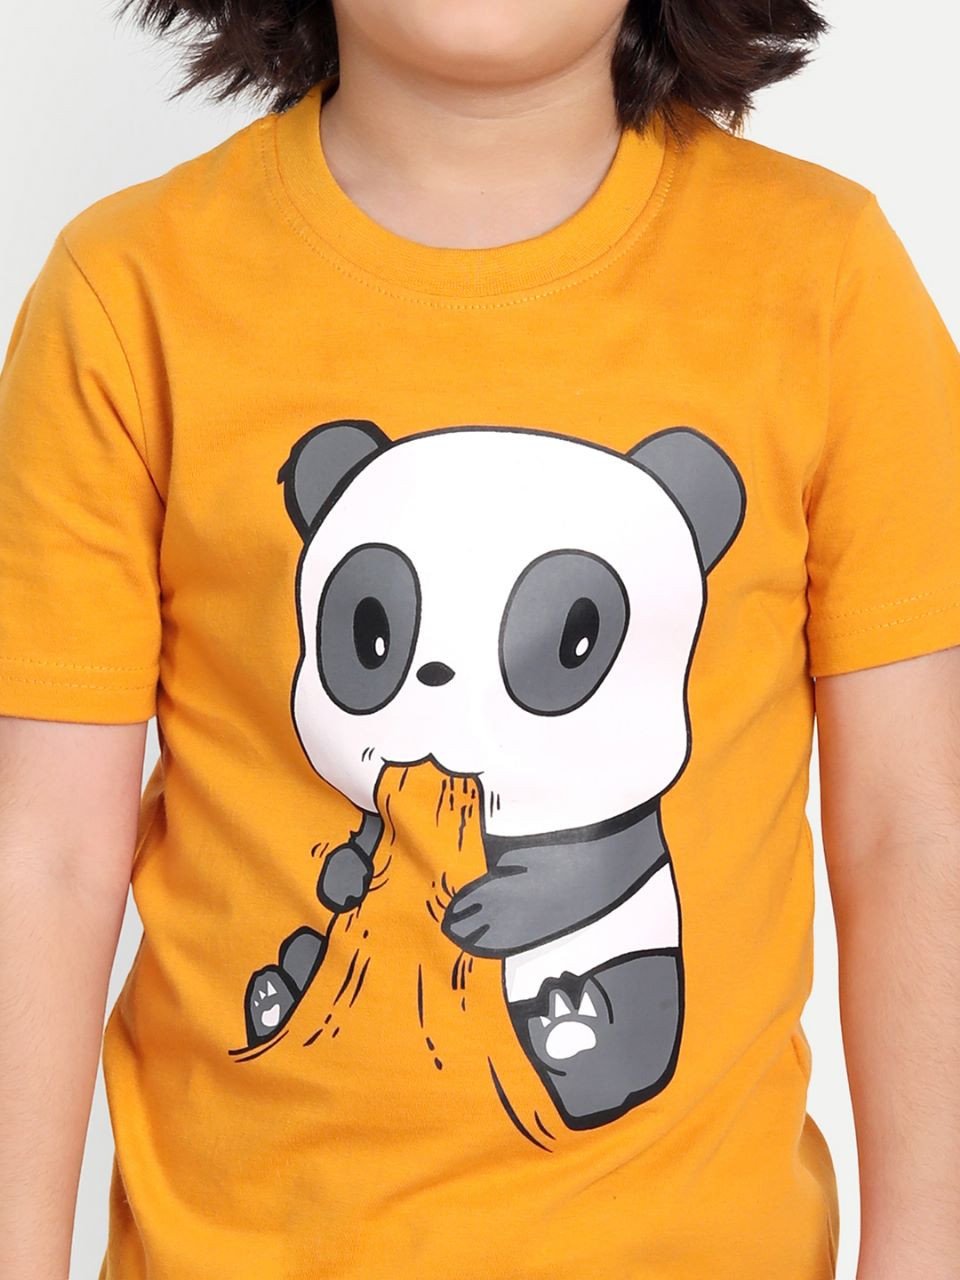 Blackbird Collection's Stylish Round Neck Half Sleeve Hungry Panda Printed Cotton T-Shirt For Girls